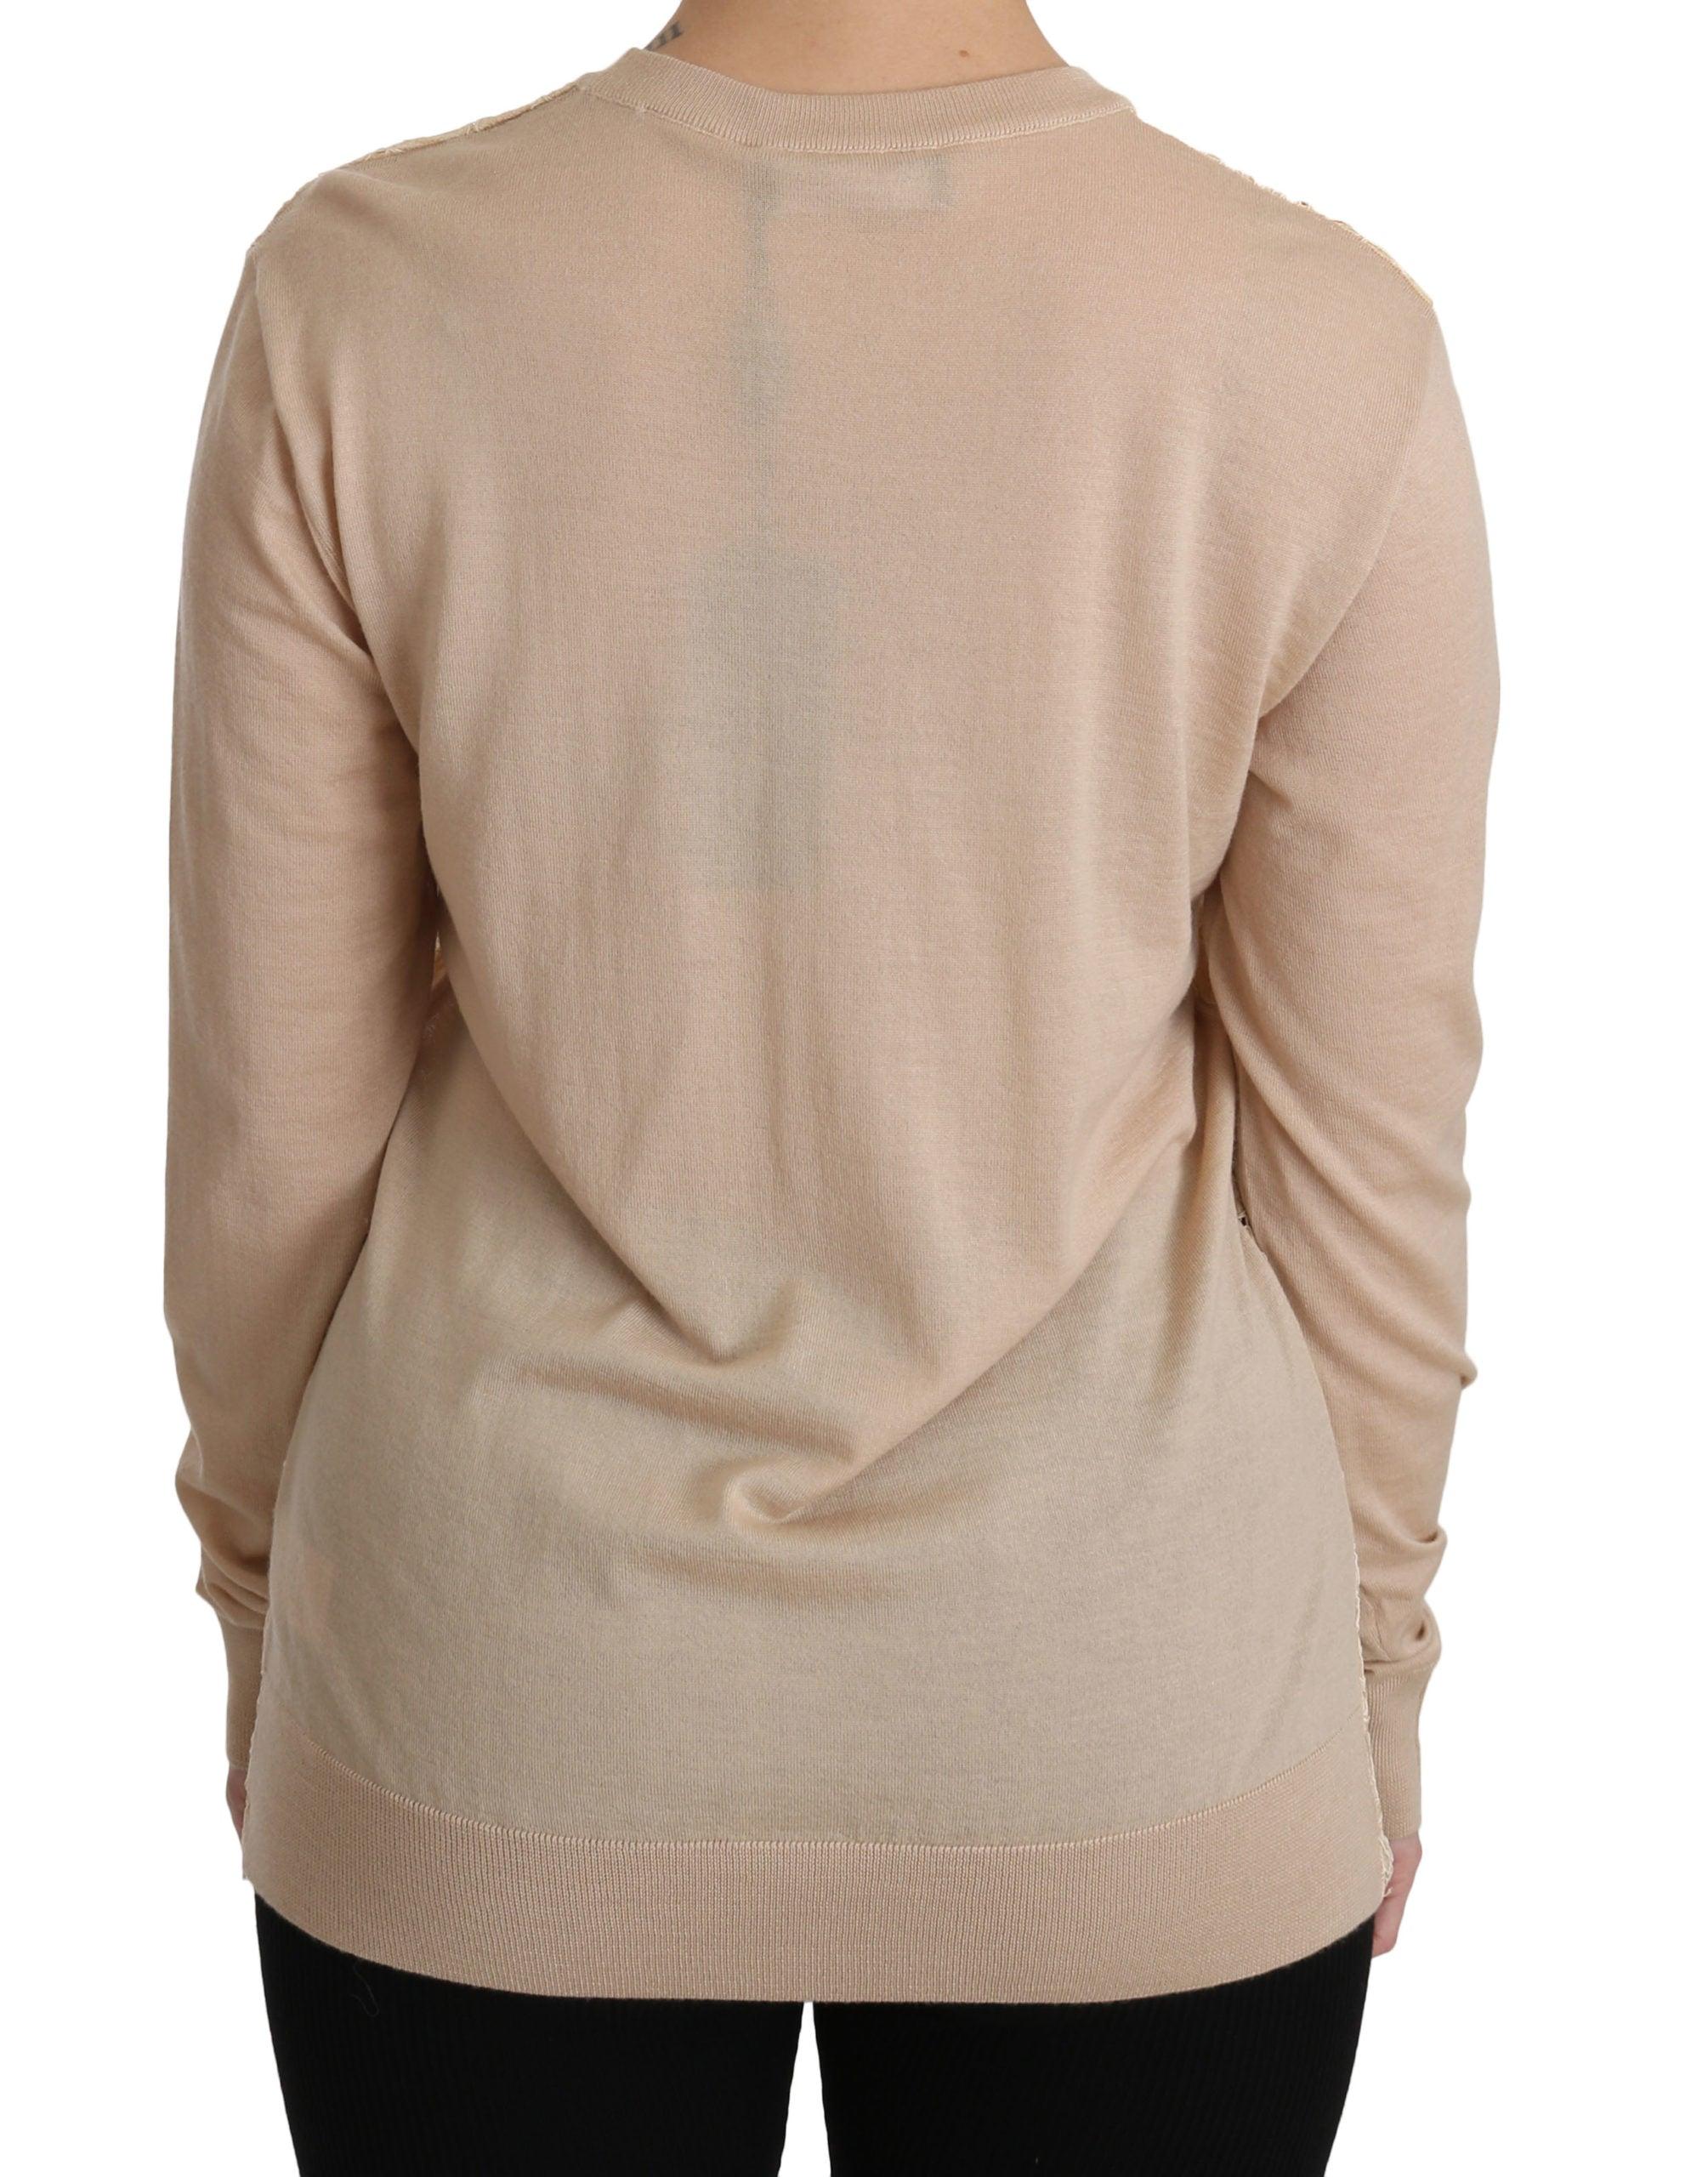 Dolce & Gabbana Lace Long Sleeve Top Cashmere Blouse in Beige (Natural) -  Save 16% - Lyst